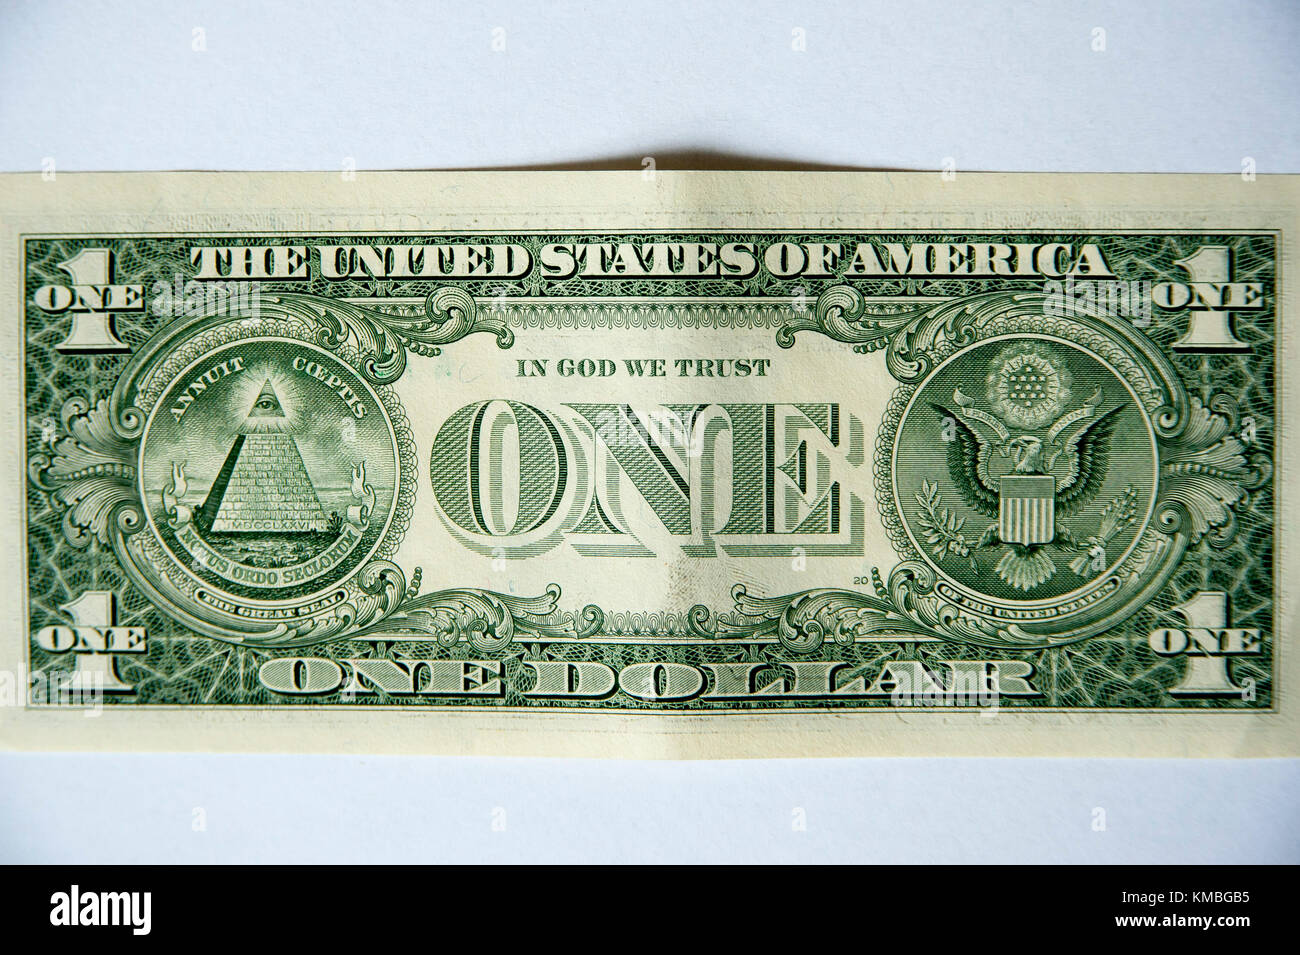 The United States one-dollar bill ($1) reverse with Great Seal of the United States © Wojciech Strozyk / Alamy Stock Photo Stock Photo